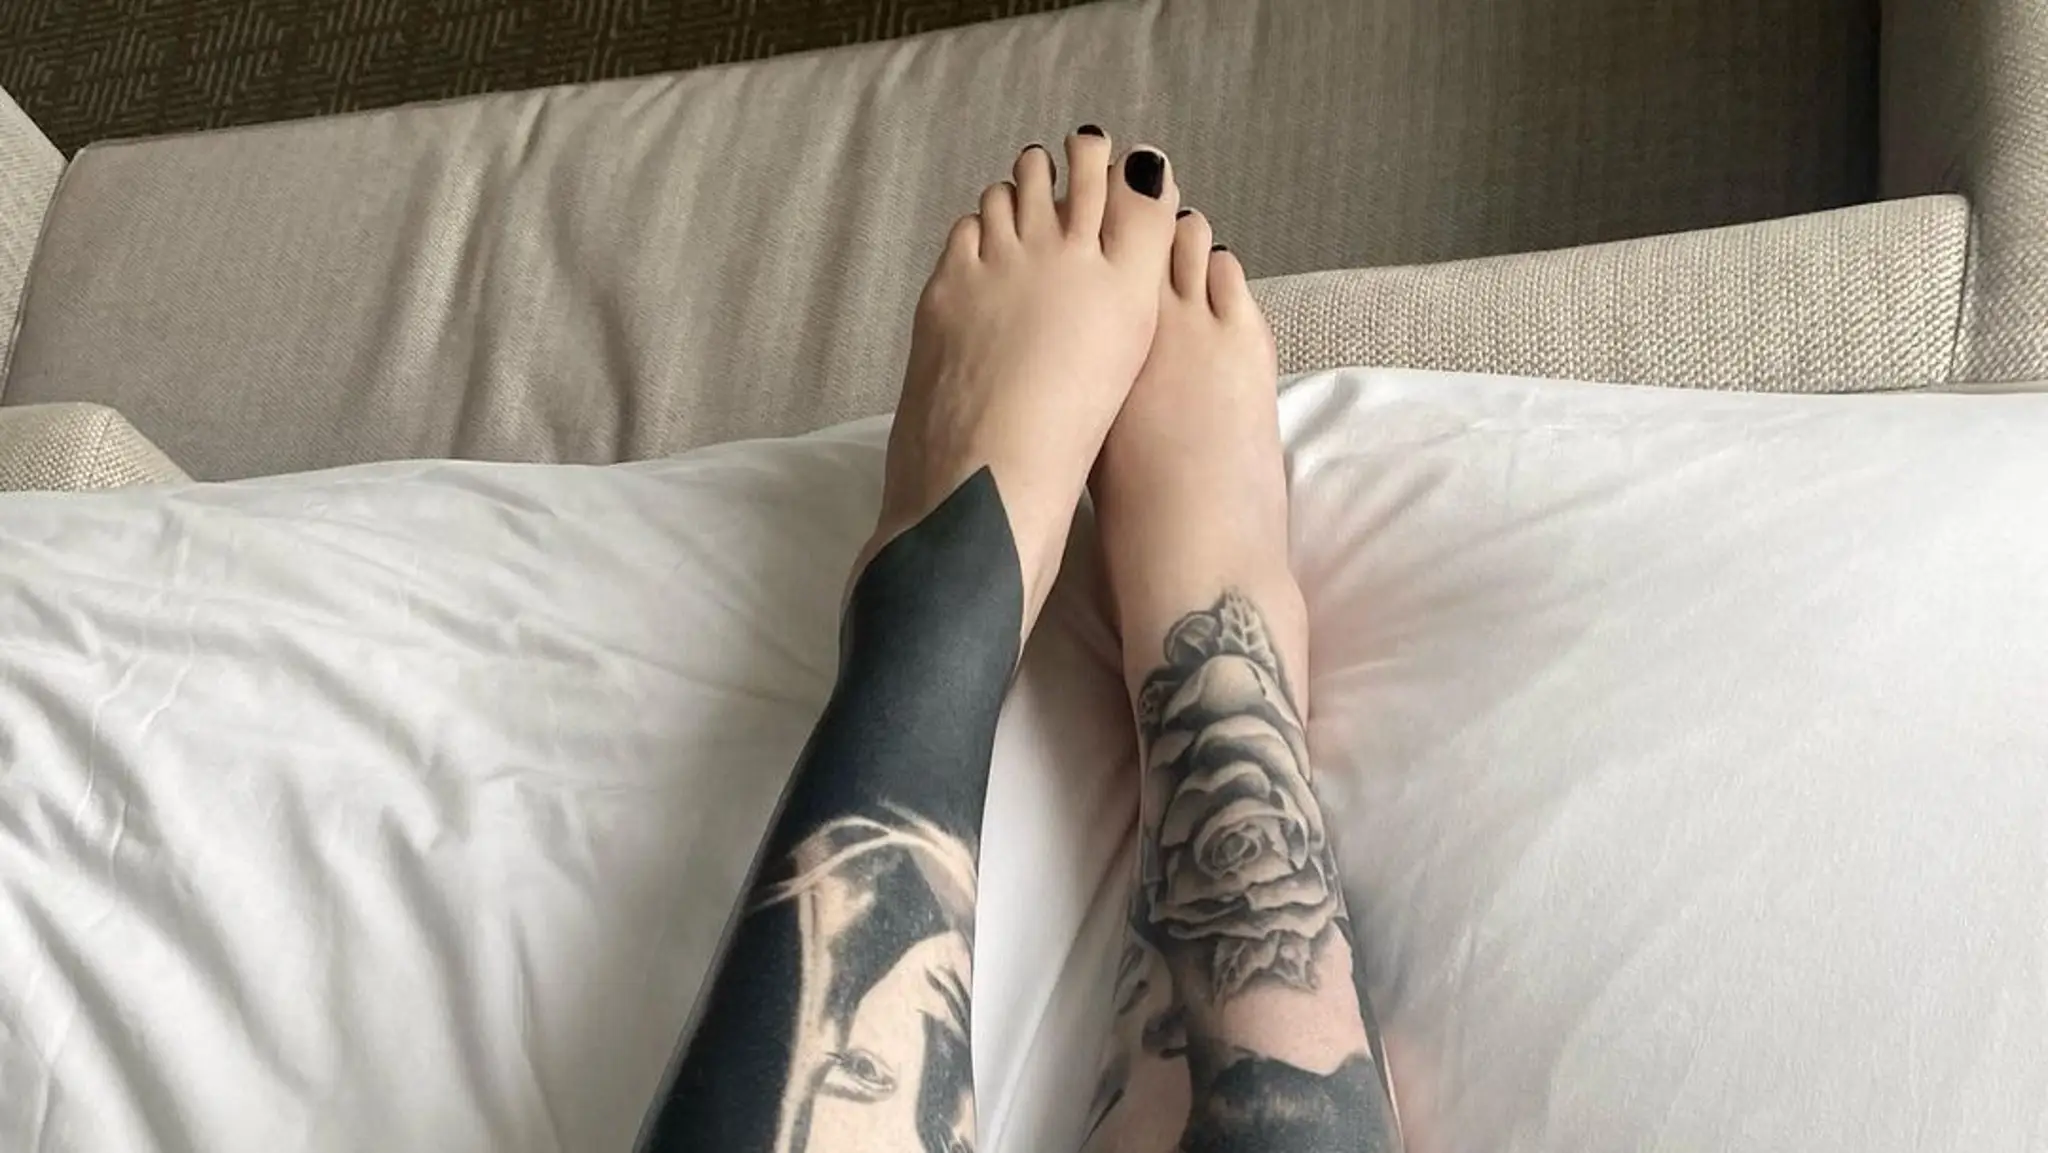 Kat Von D Spent Almost 40 Hours, ‘Blacking Out’ Tattoos She No Longer Wants